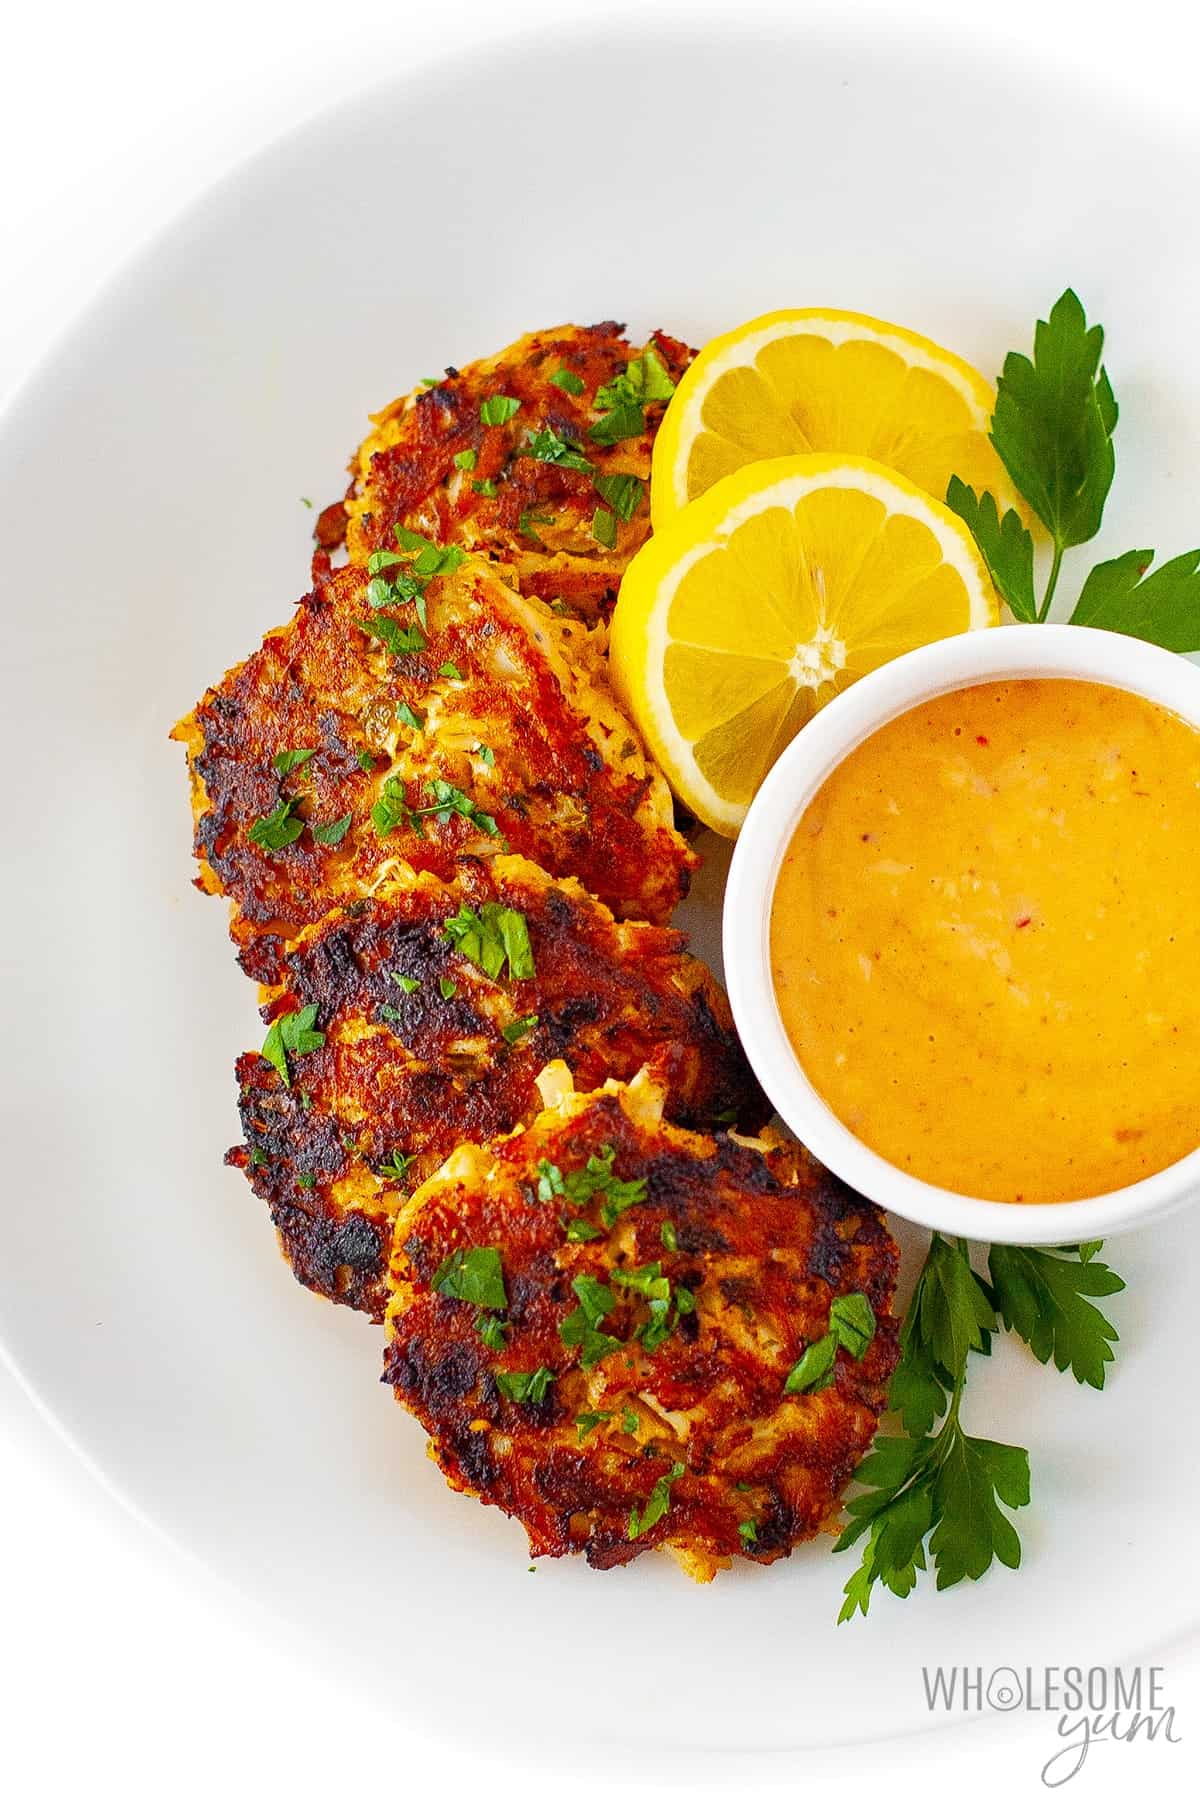 Keto crab cakes recipe on a platter with sauce and lemons.